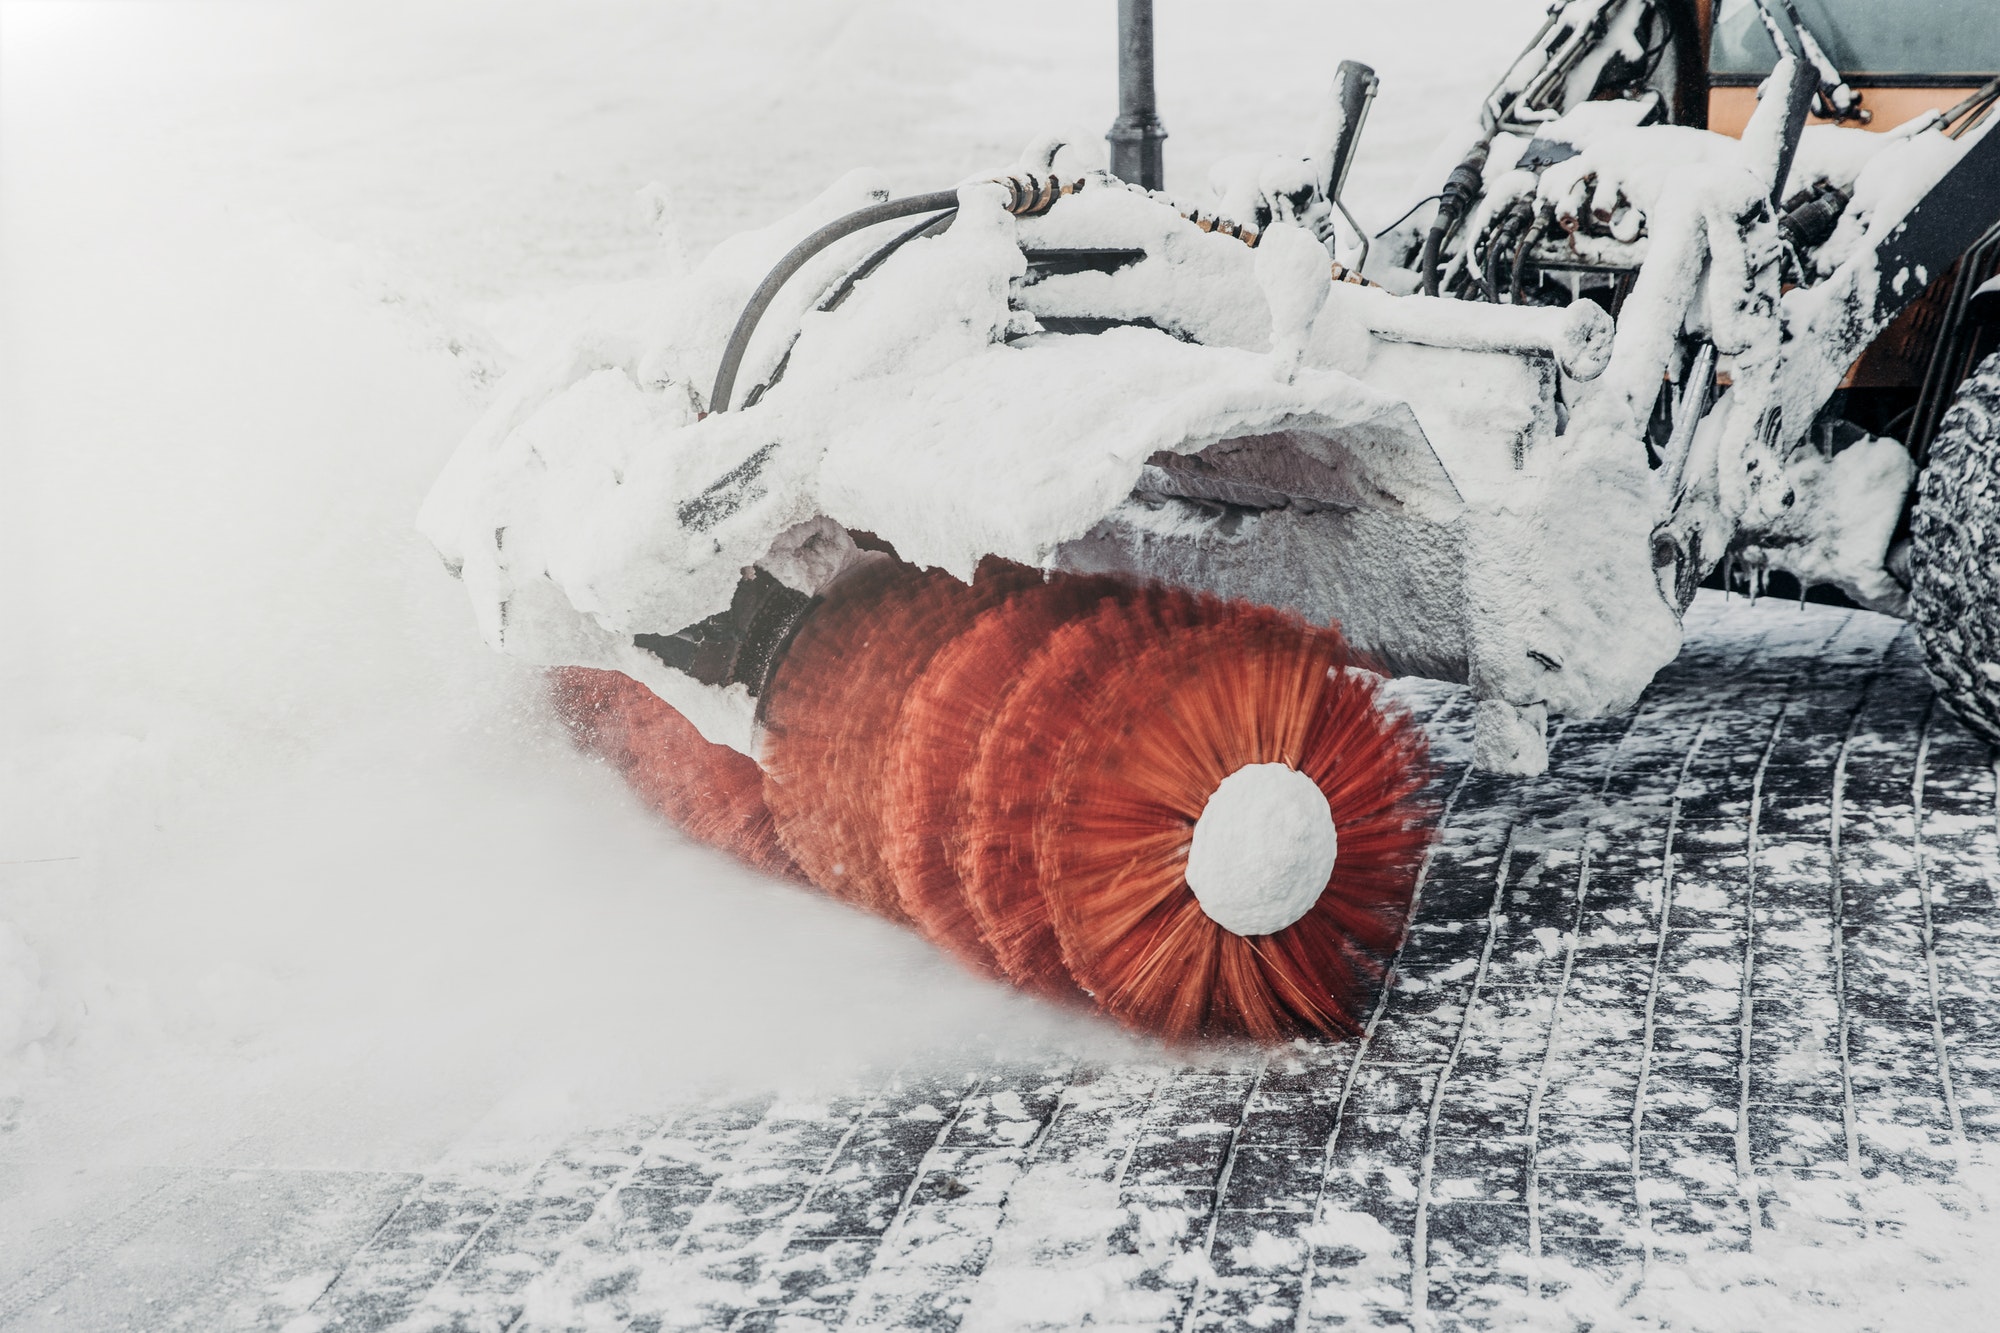 Tractor cleans road from snow after blizzard or heavy snowstorm. Cleaning or plowing snow